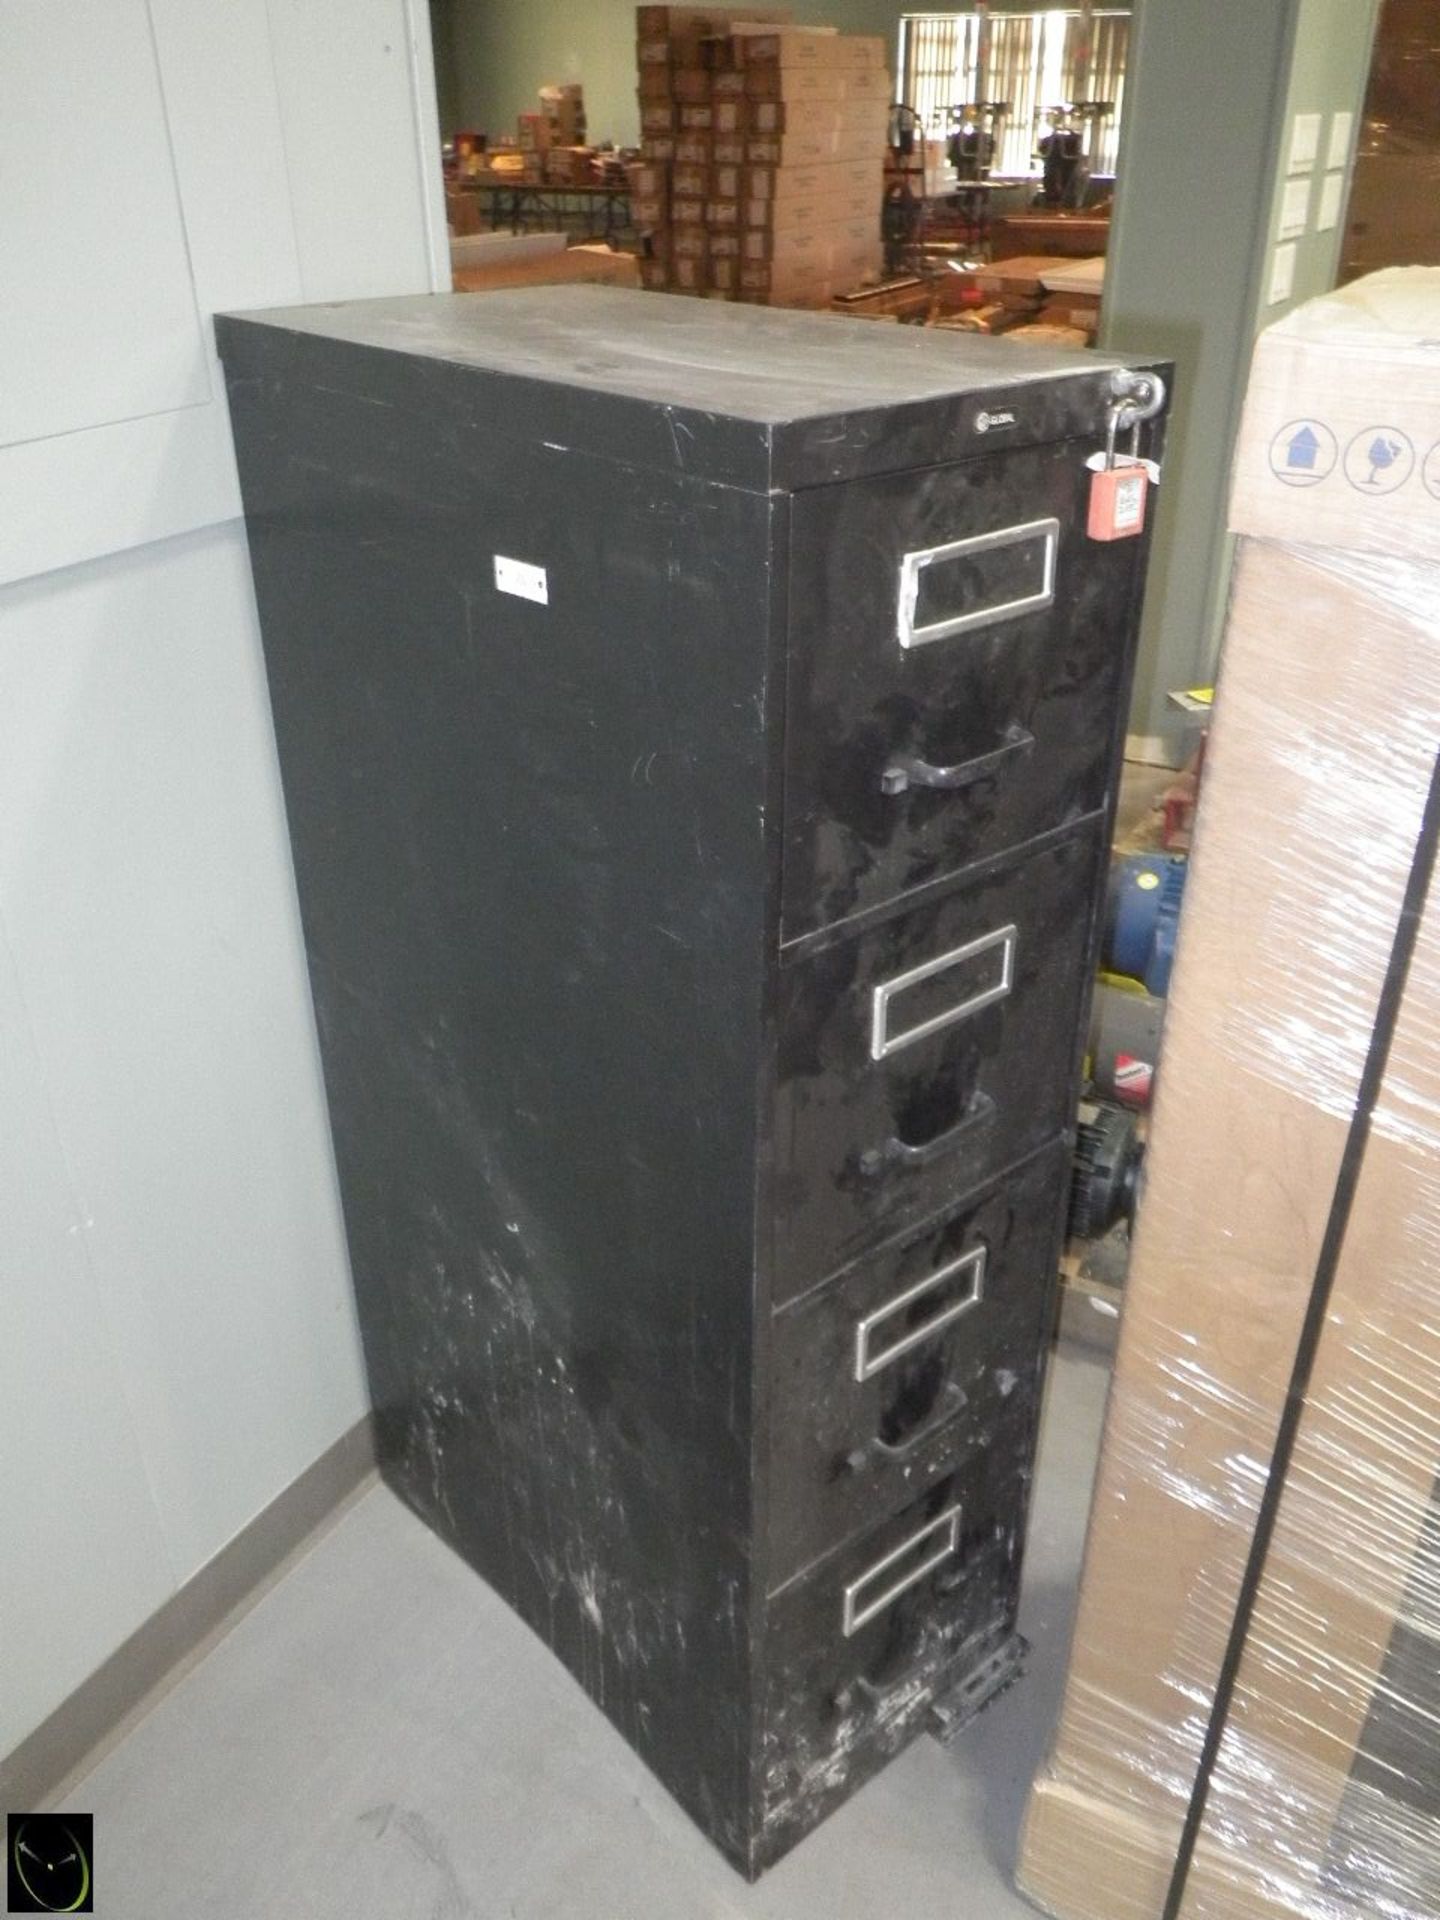 TWO Letter Size Filing Cabinets - ONE UNUSED Still In Case, ONE Used. - Image 2 of 2